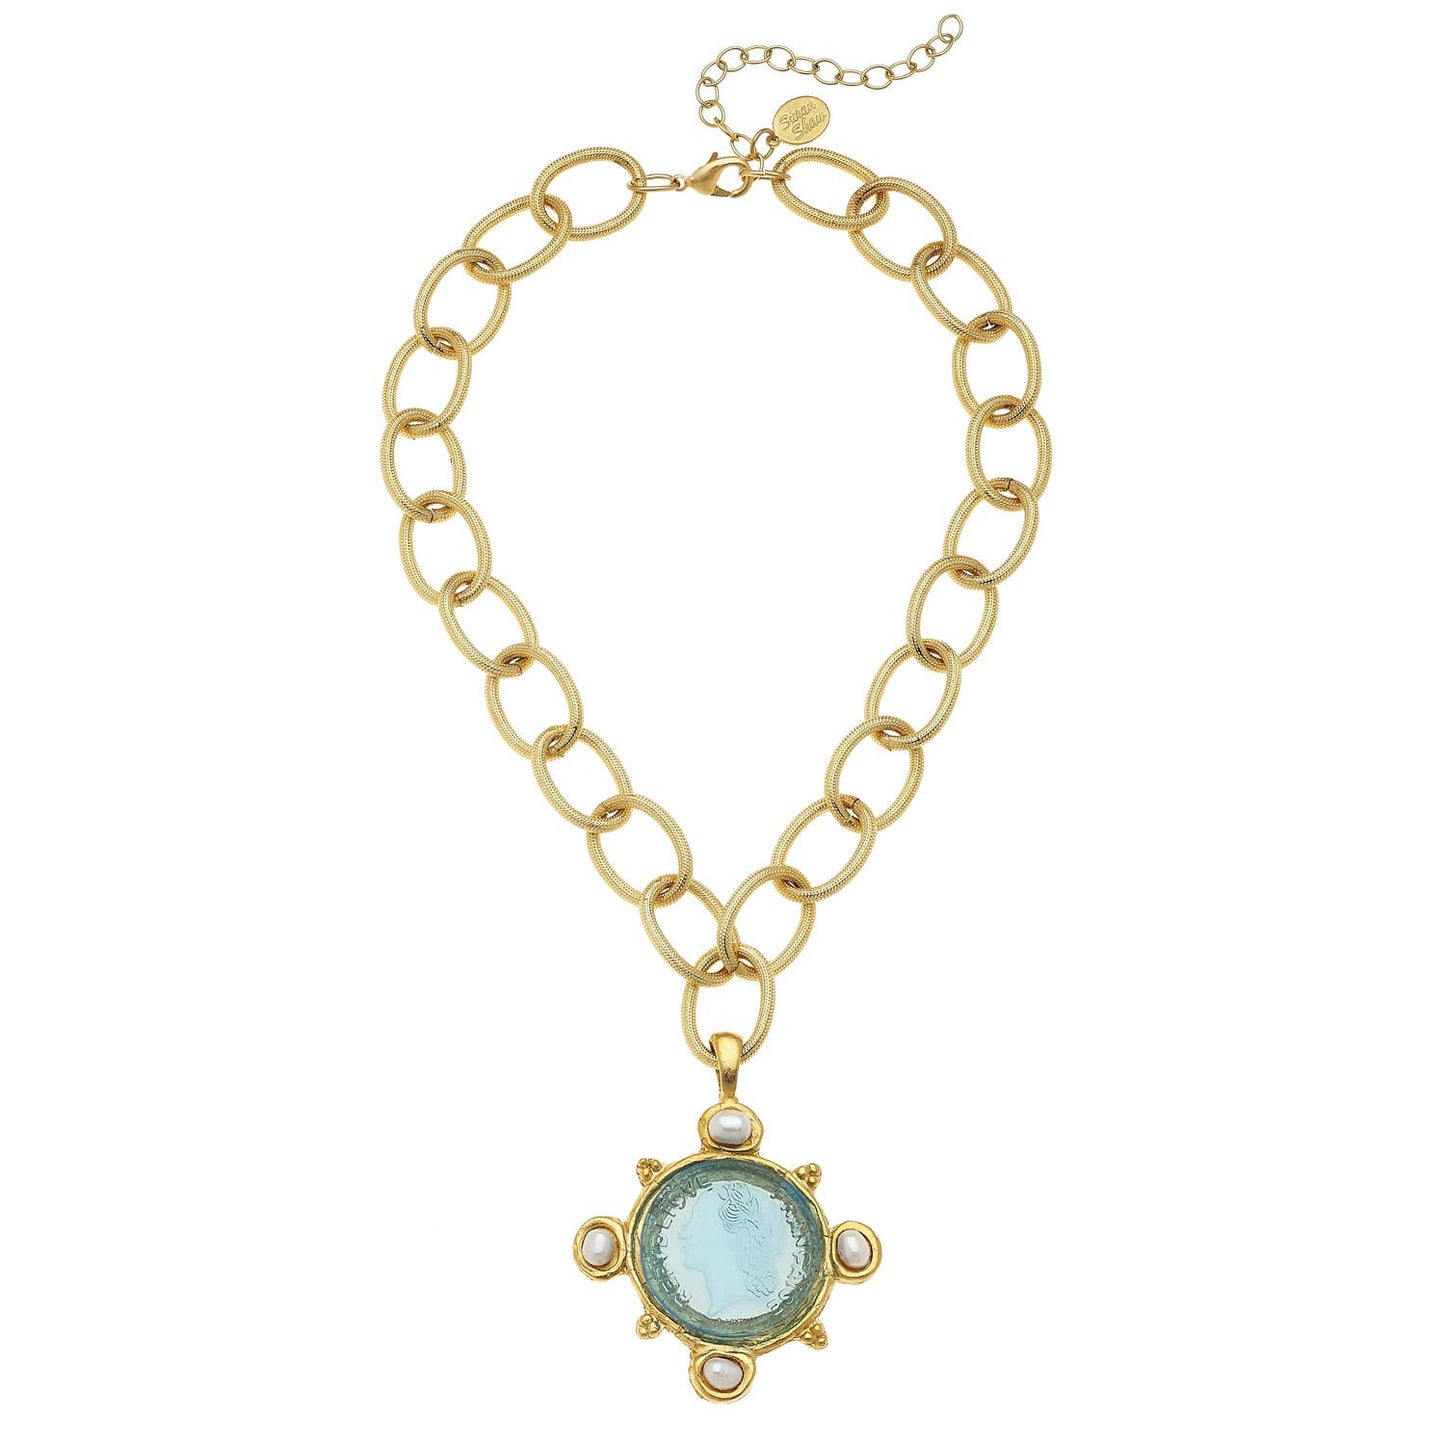 Aqua Venetian Glass Coin Intaglio and Genuine Freshwater Pearls on Chain Necklace